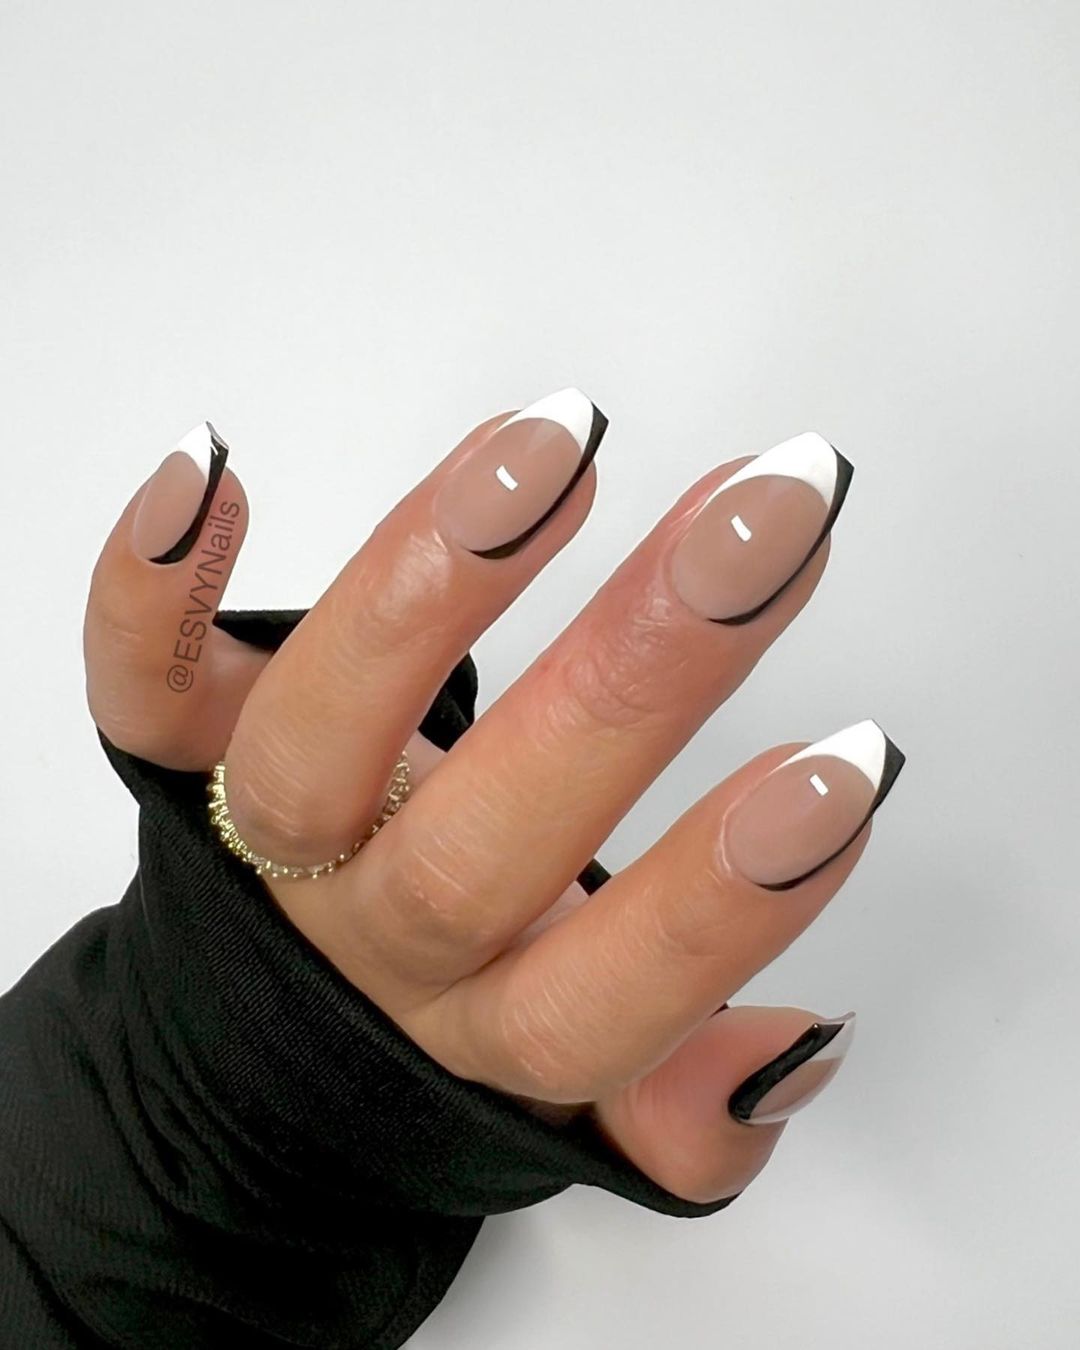 Black and White French Tip Coffin Nails